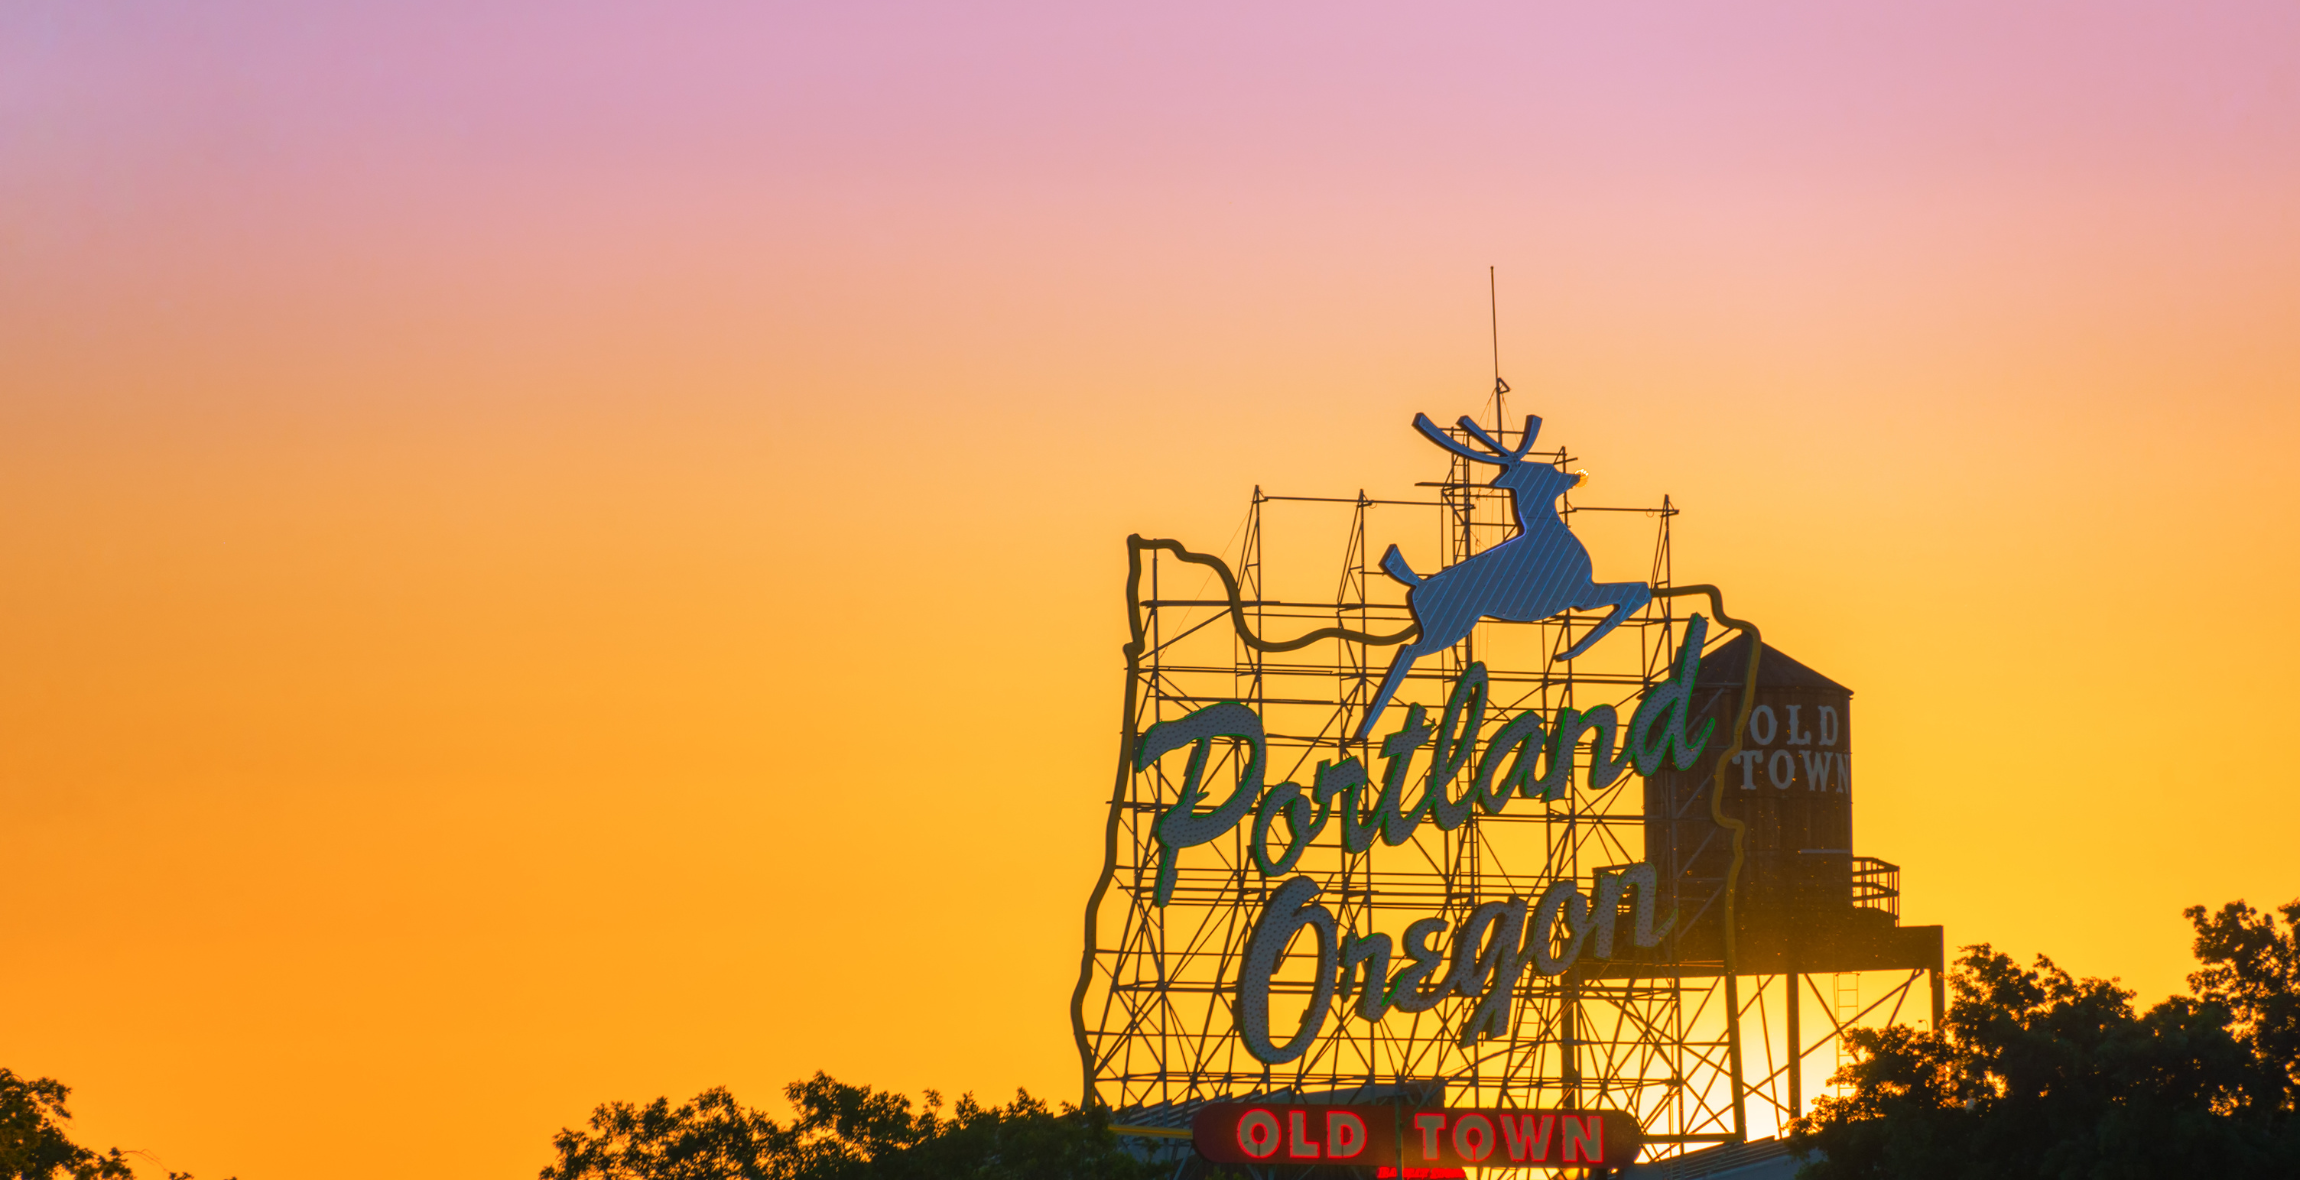 A view of the Portland Oregon welcome sign during sunset.